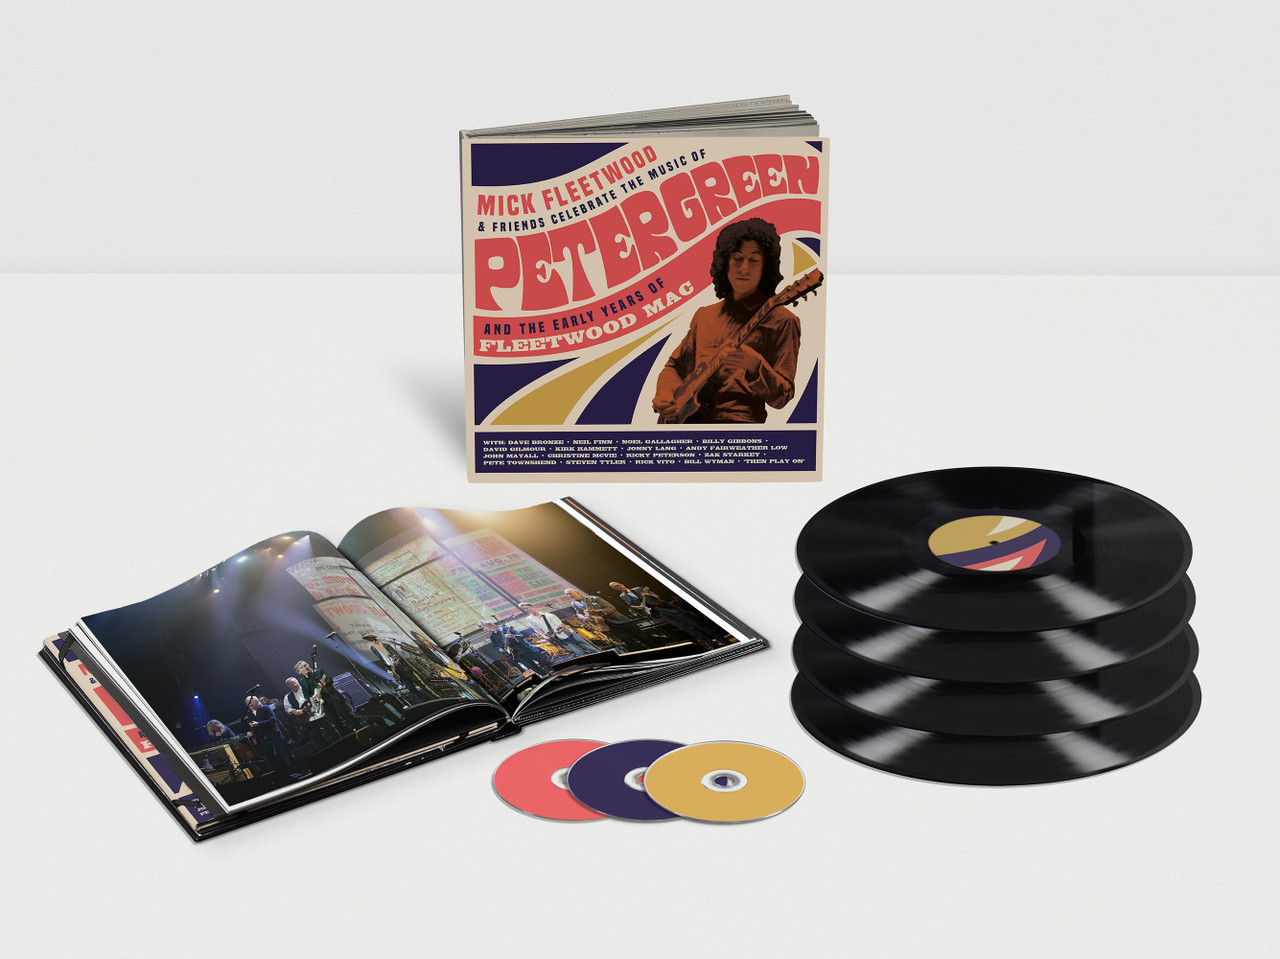 Mick Fleetwood & Friends Celebrate Peter Green And The Early Years Of Fleetwood Mac, deluxe box set